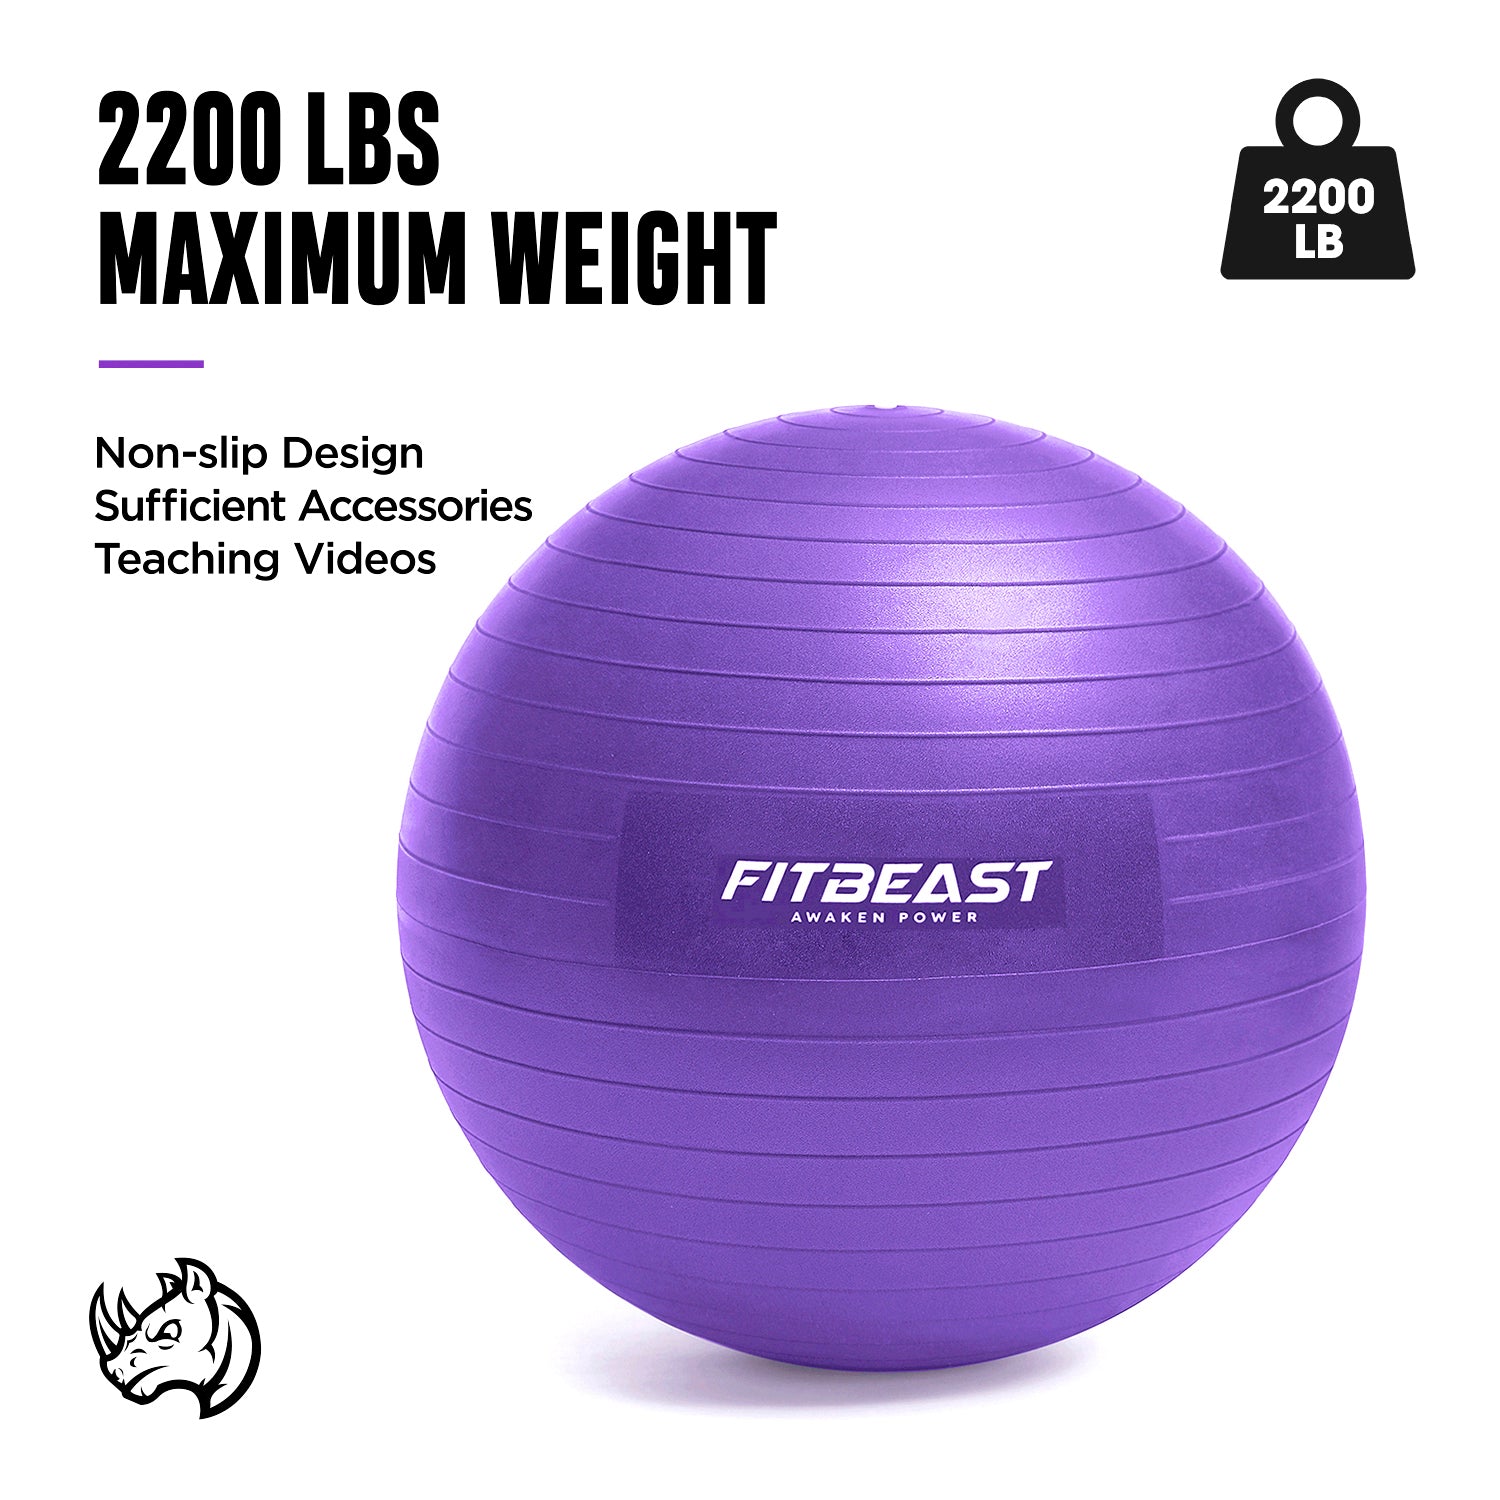 Best 75cm Yoga Ball Chair/Exercise Ball for Home, Office, or  Relaxation丨FitBeast